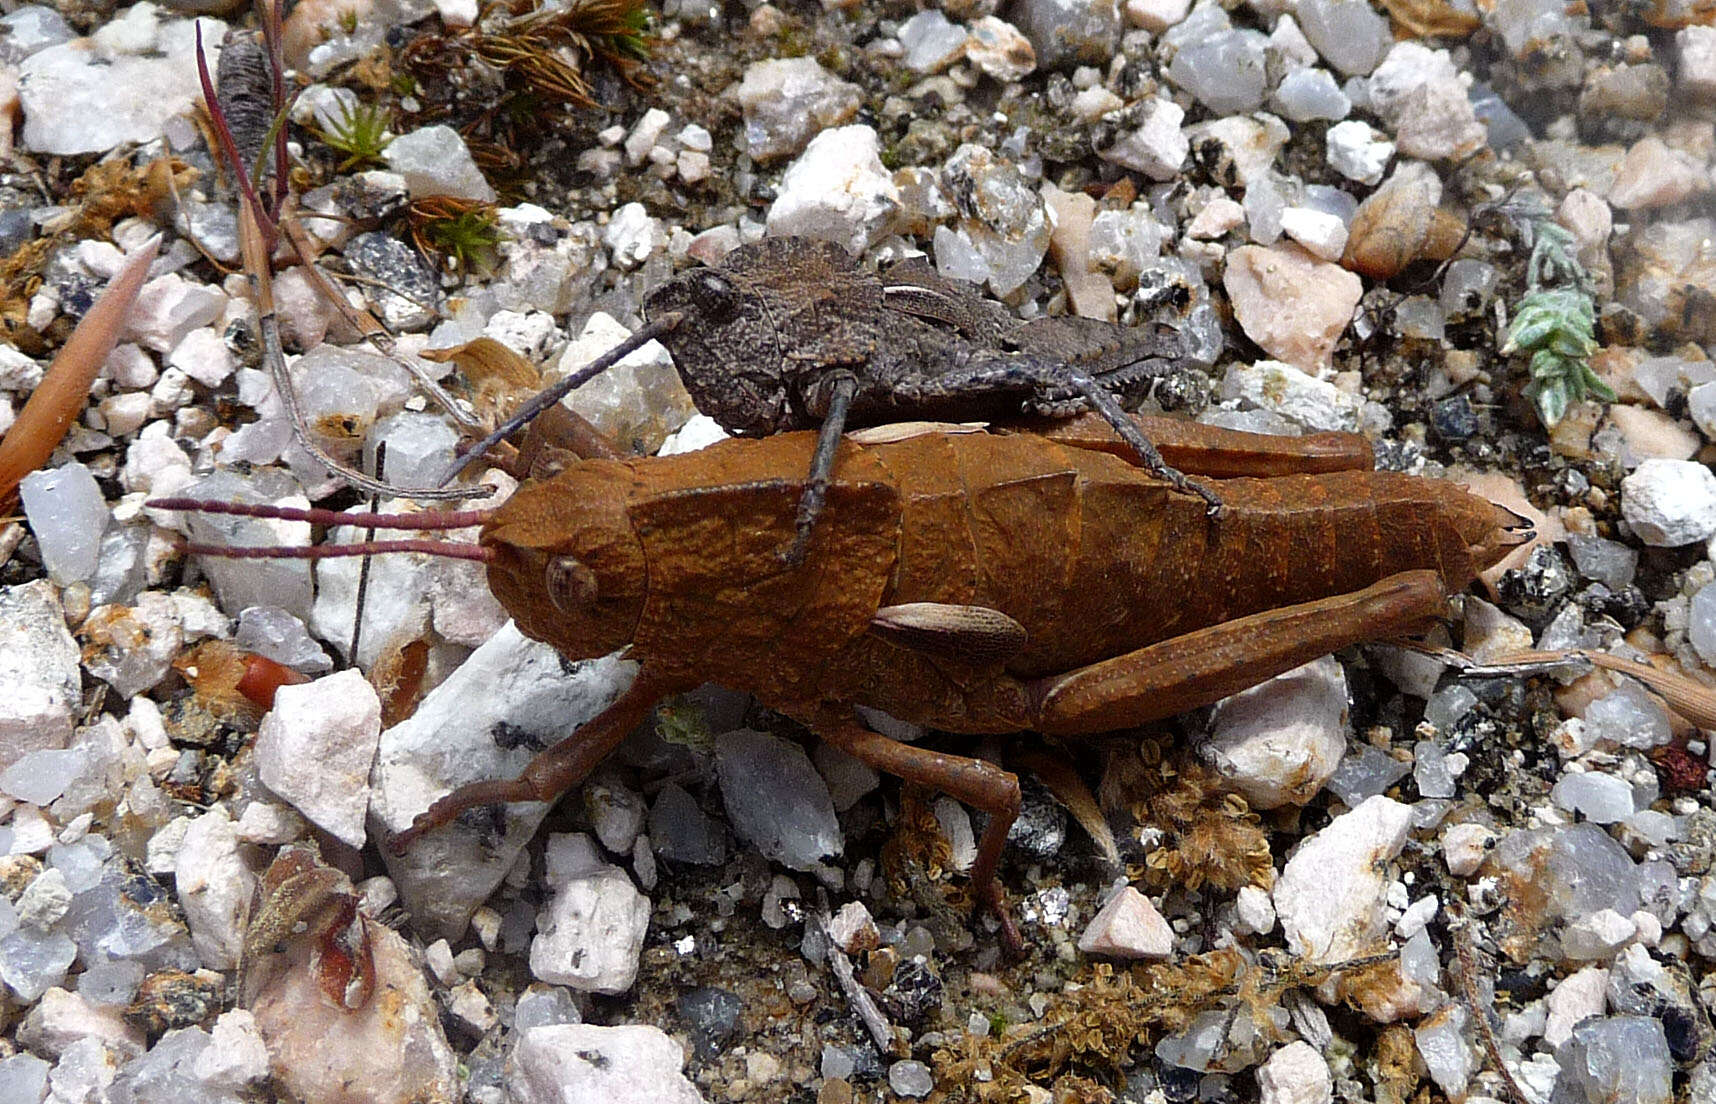 Image of toad grasshoppers